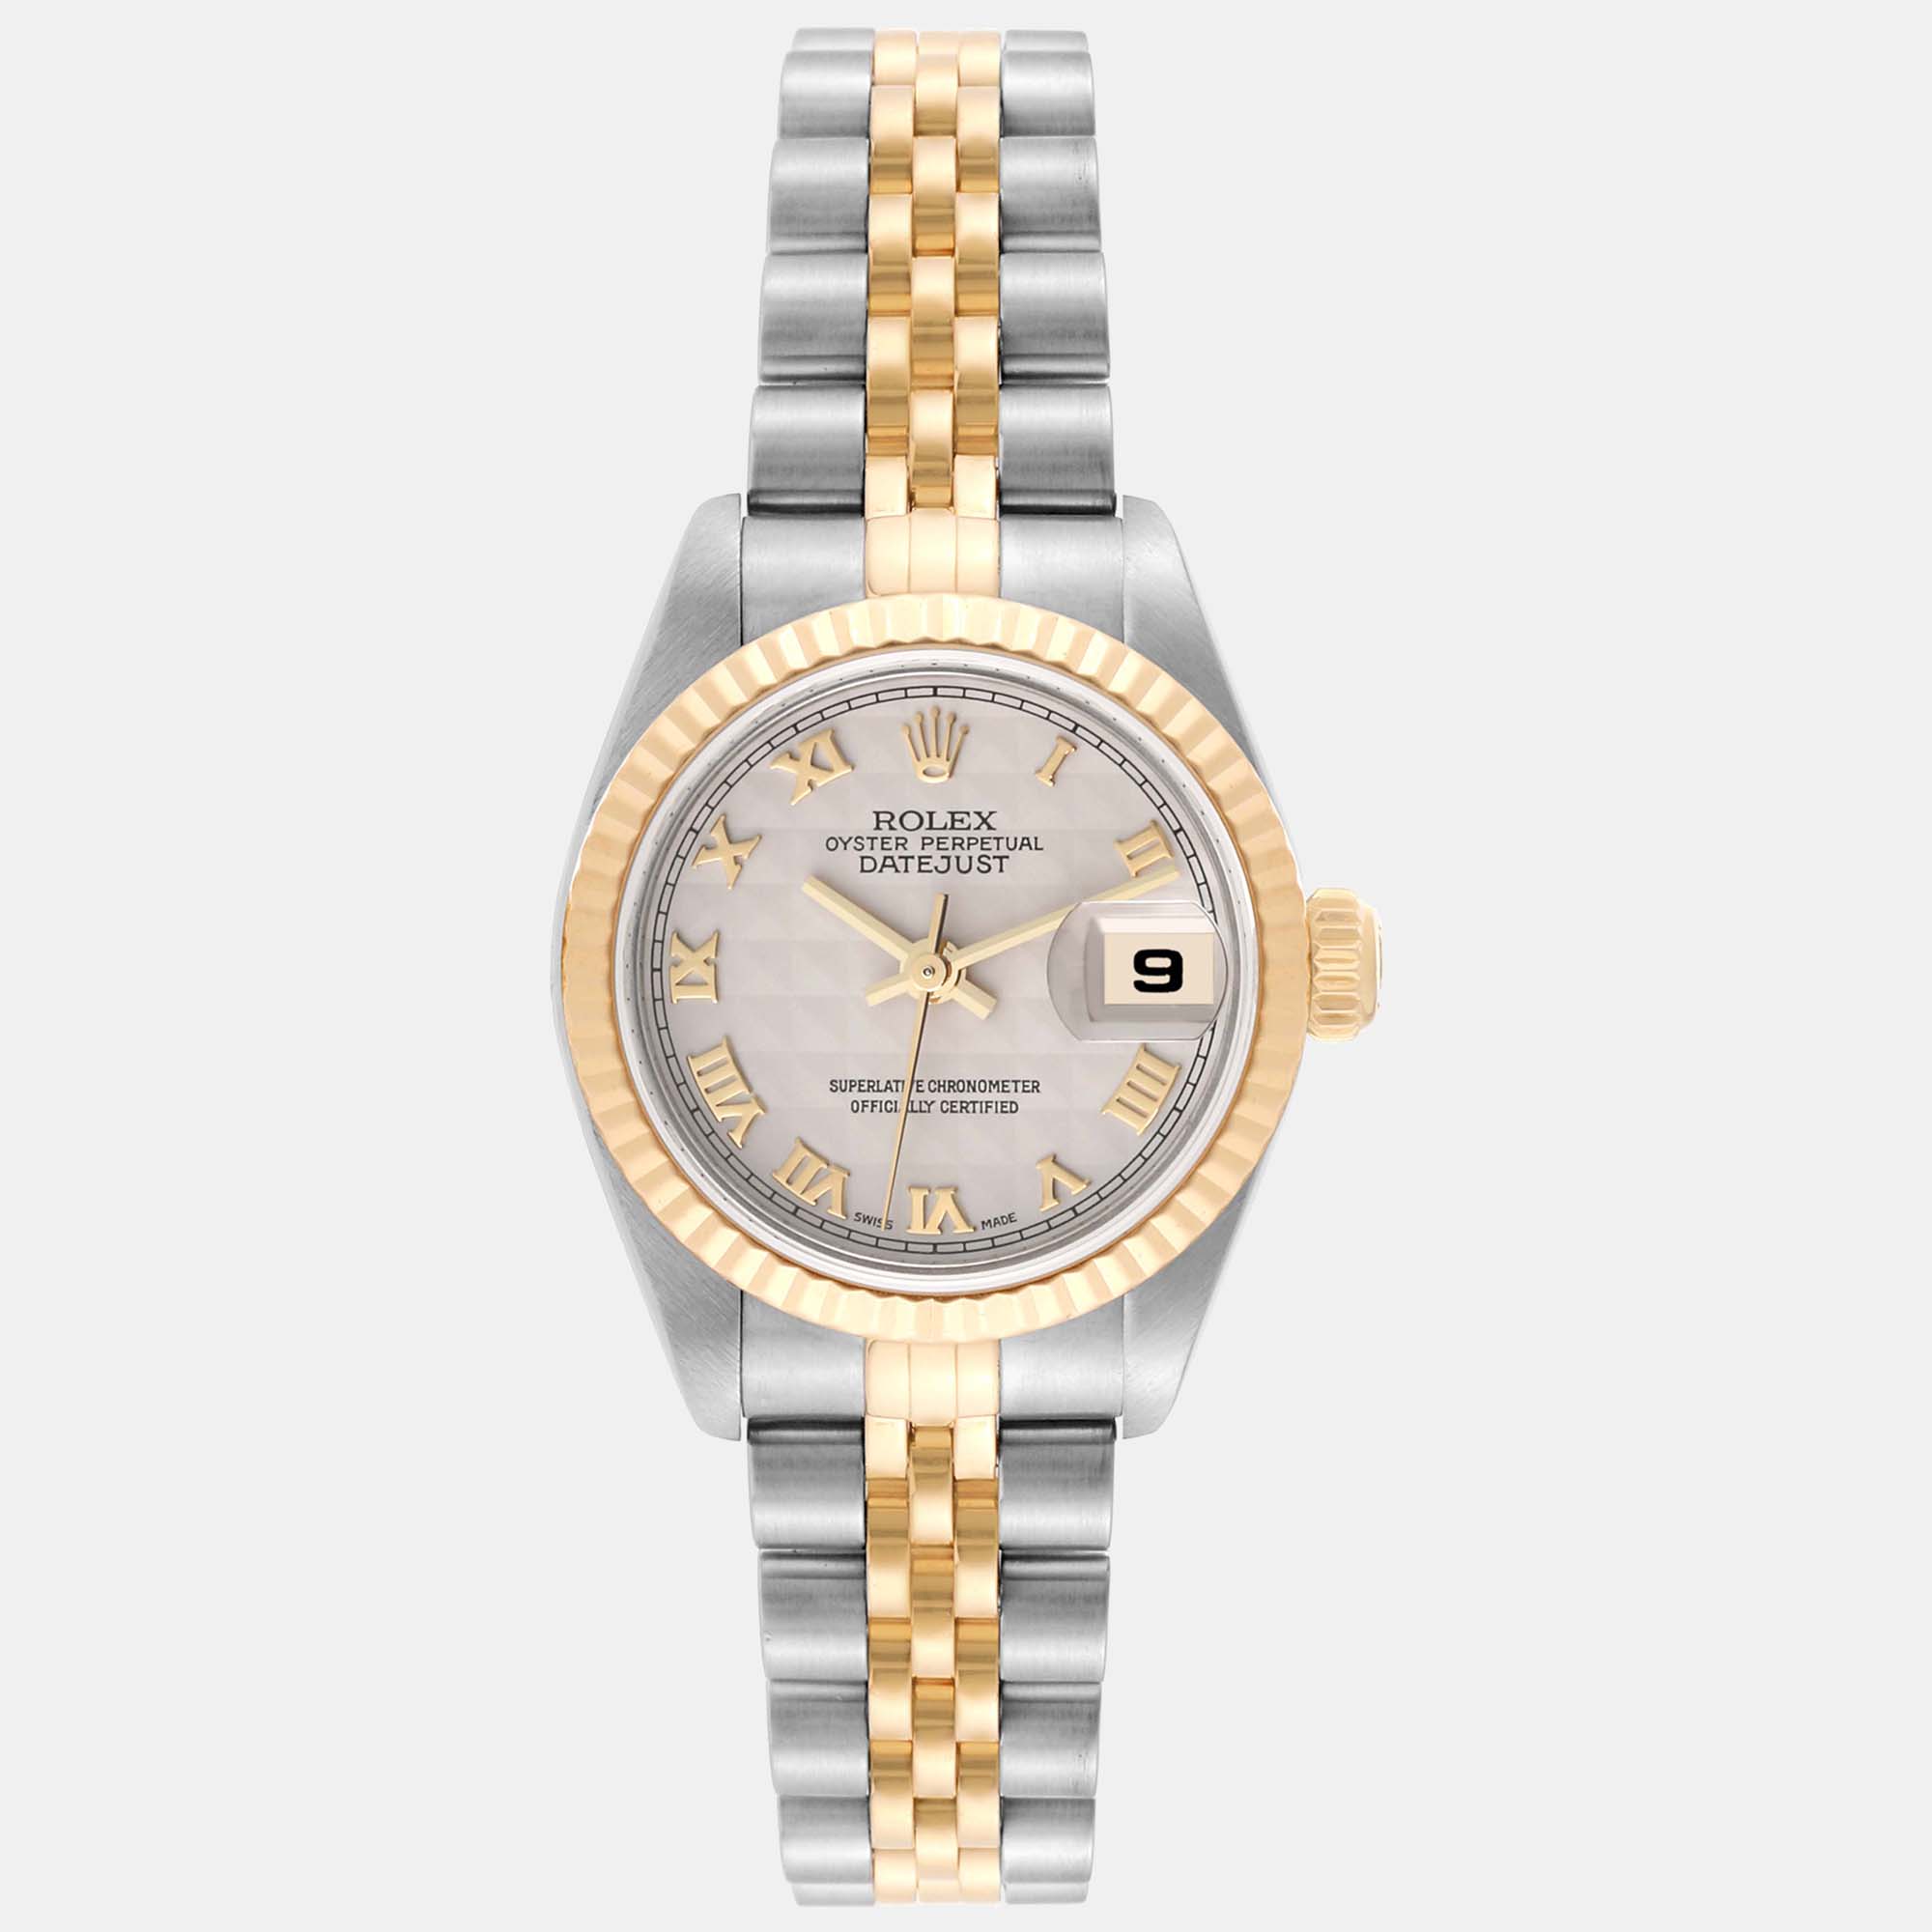 Rolex datejust steel yellow gold ivory pyramid dial ladies watch 79173 26 mm